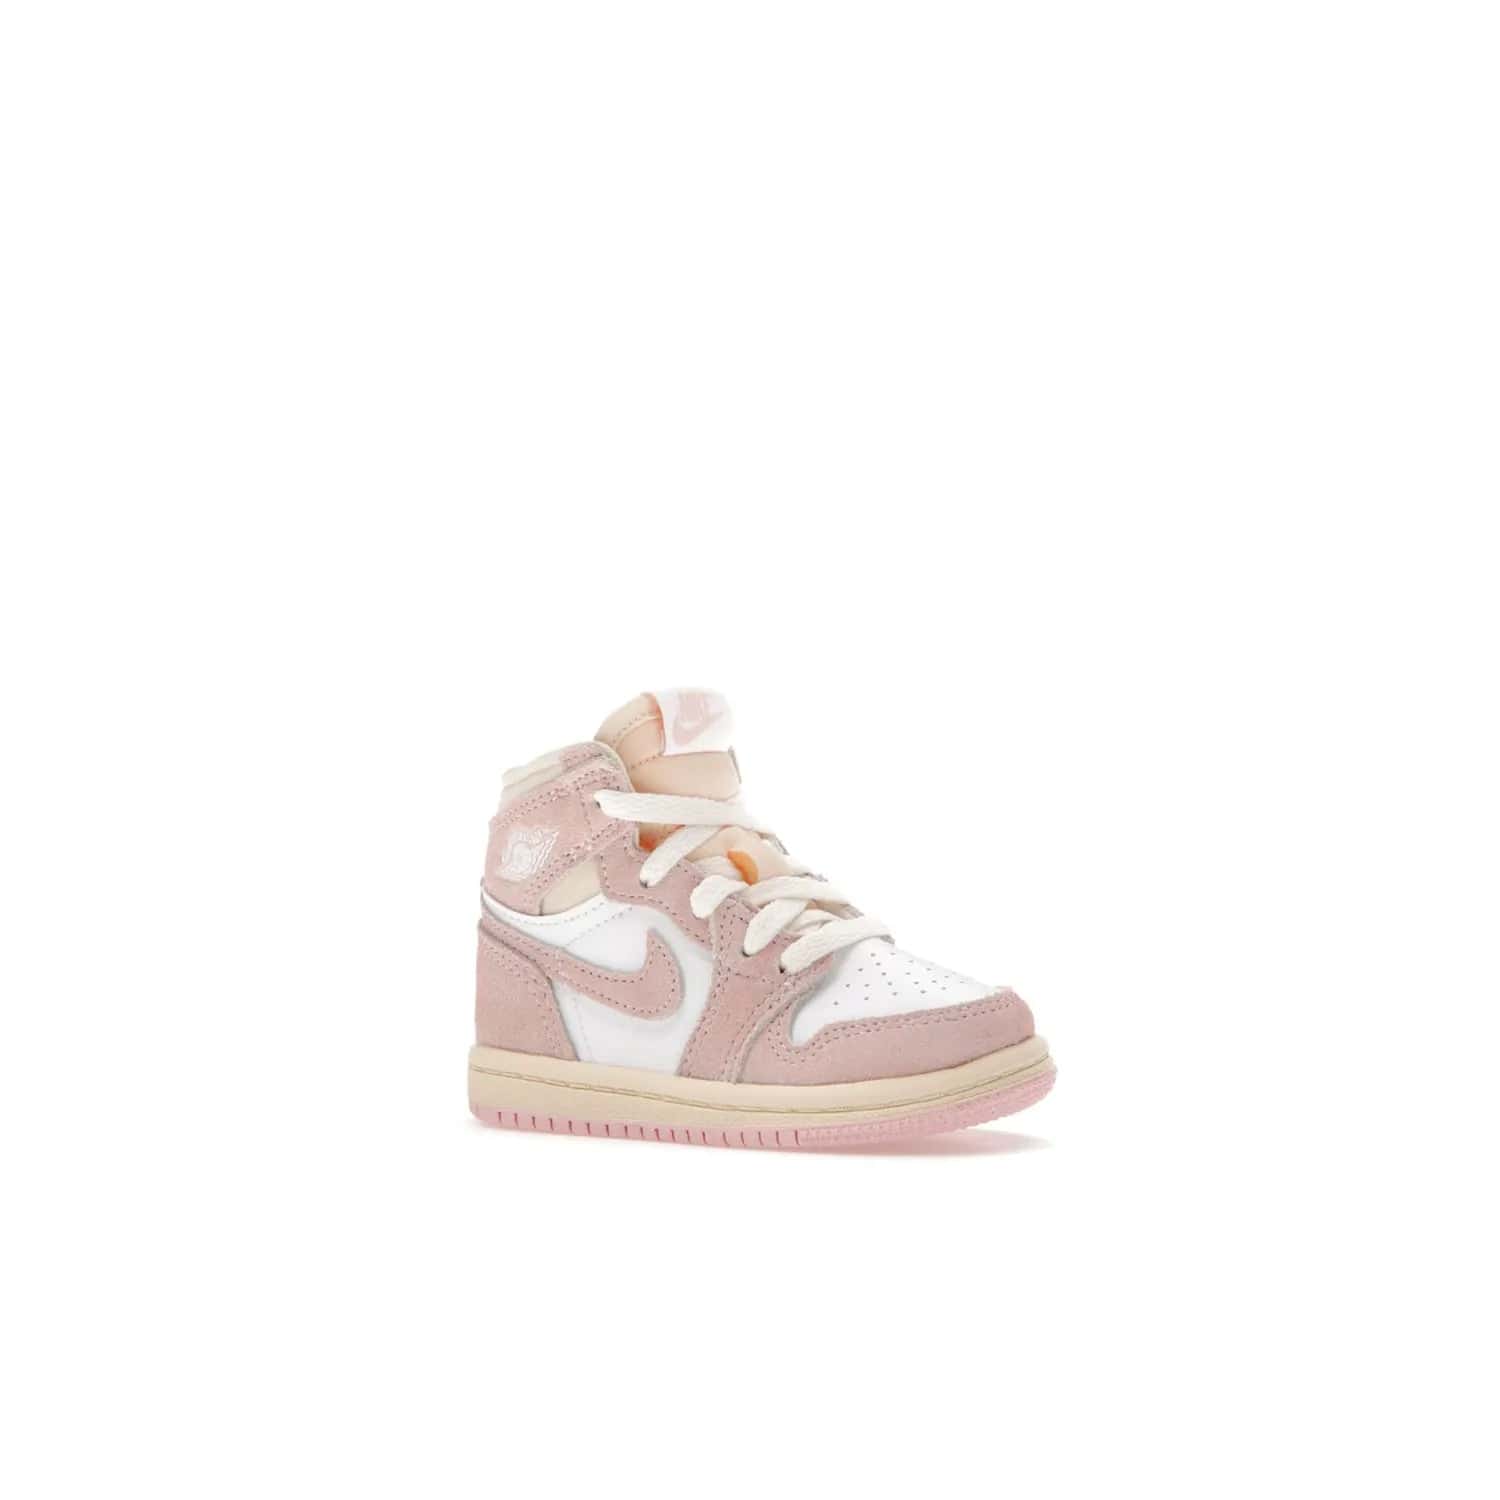 Jordan 1 Retro High OG Washed Pink (TD) - Image 4 - Only at www.BallersClubKickz.com - Retro style meets modern comfort: Introducing the Jordan 1 High OG Washed Pink (TD). Combining Atmosphere/White/Muslin/Sail colors with a high-rise silhouette, these shoes will be an instant classic when they release April 22, 2023.